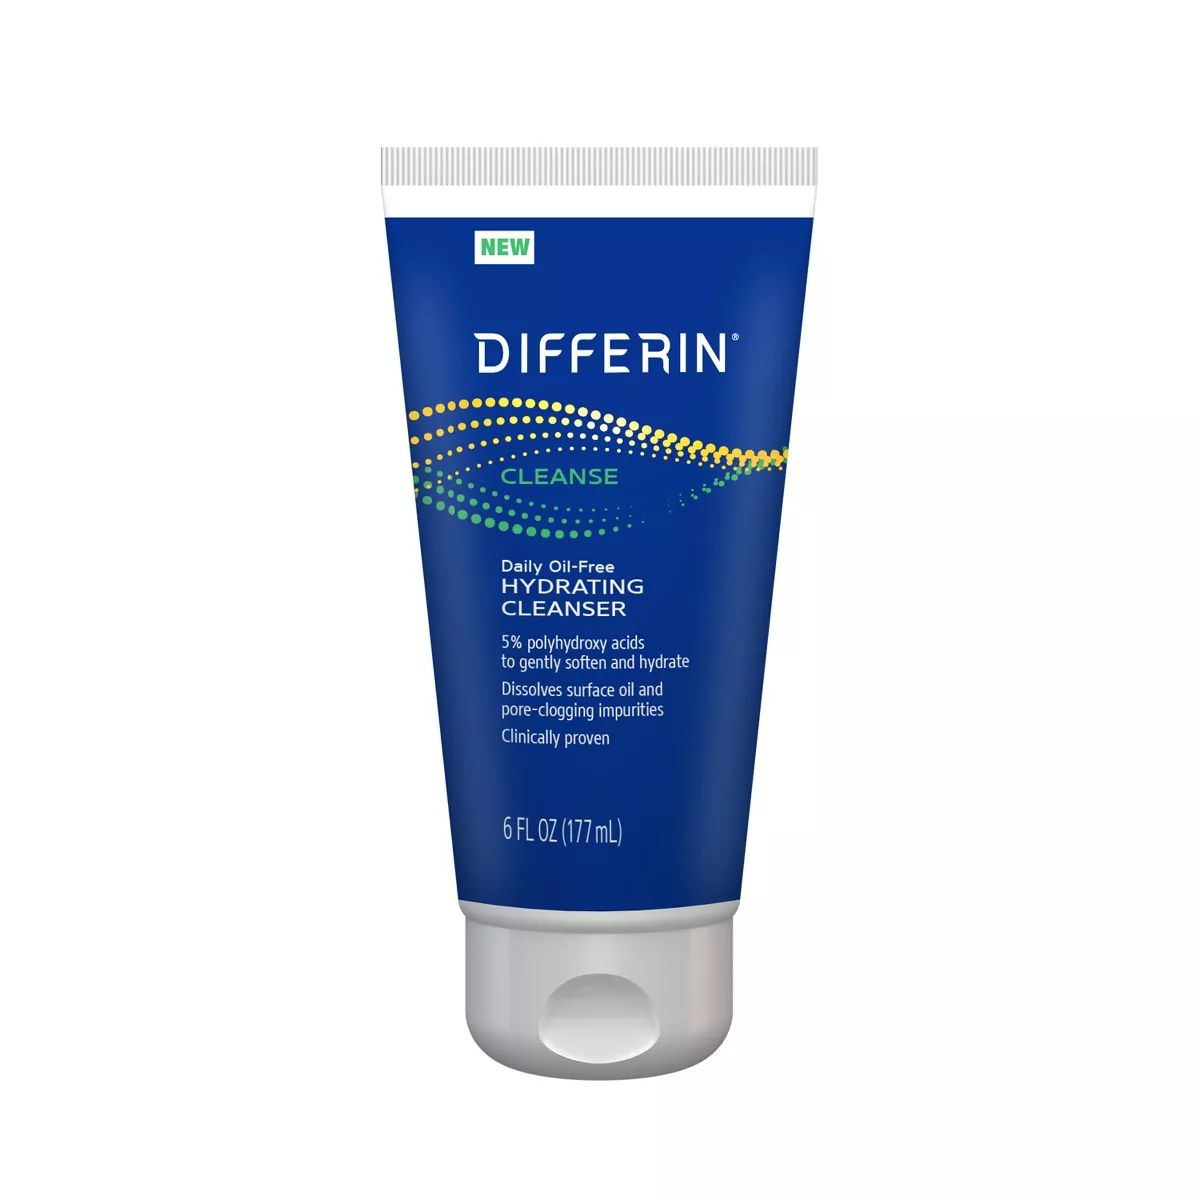 Differin Daily Oil-Free Hydrating Face Cleanser - 6 fl oz | Target